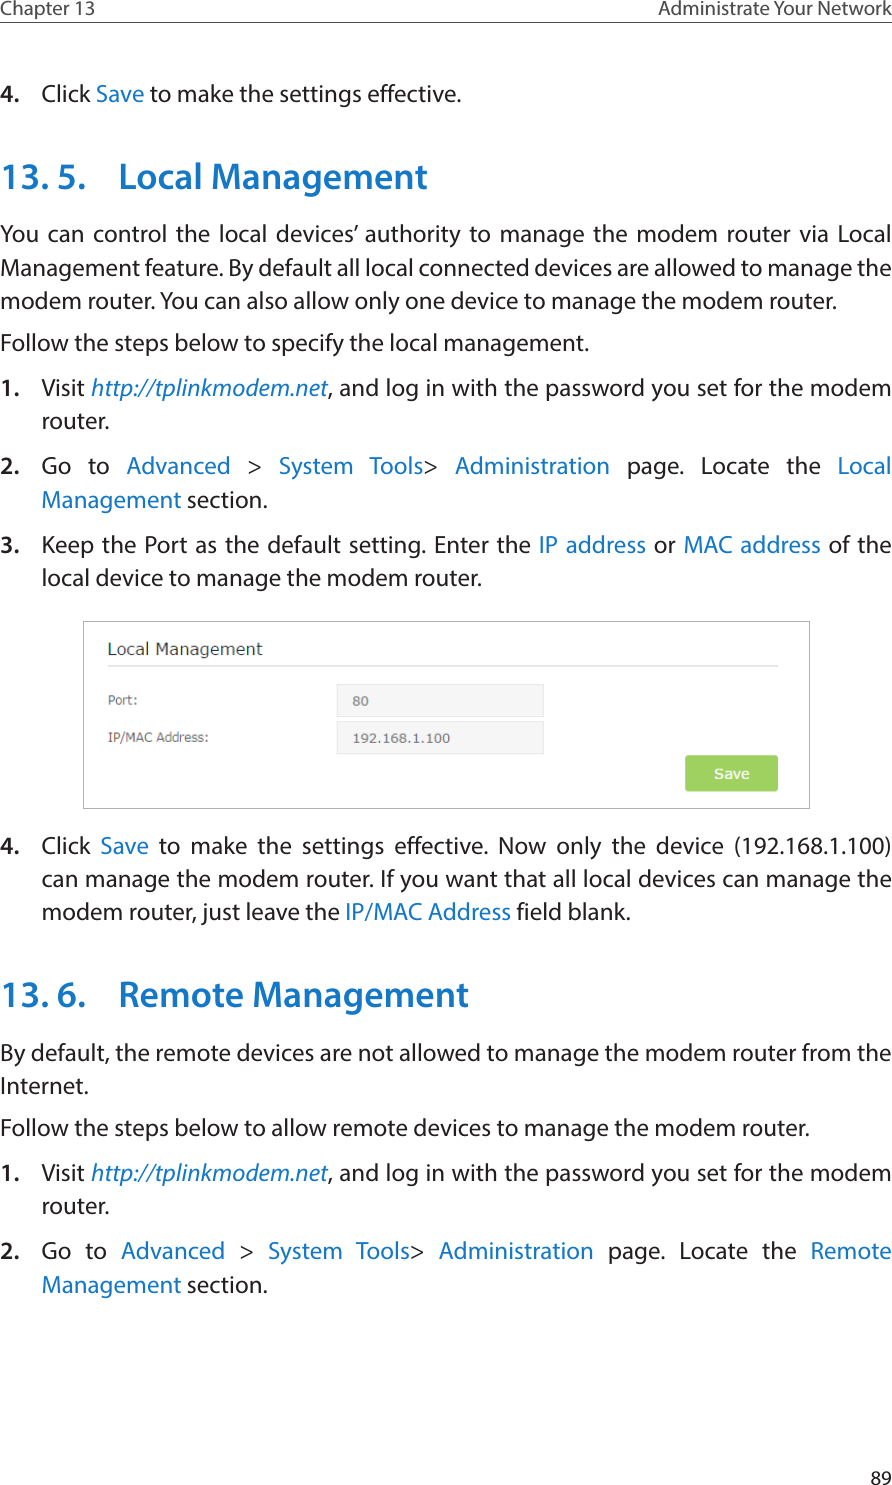 89Chapter 13 Administrate Your Network 4.  Click Save to make the settings effective.13. 5.  Local ManagementYou can control the local devices’ authority to manage the modem router via Local Management feature. By default all local connected devices are allowed to manage the modem router. You can also allow only one device to manage the modem router.Follow the steps below to specify the local management.1.  Visit http://tplinkmodem.net, and log in with the password you set for the modem router.2.  Go to Advanced &gt;  System Tools&gt;  Administration  page. Locate the Local Management section.3.  Keep the Port as the default setting. Enter the IP address or MAC address of the local device to manage the modem router. 4.  Click Save to make the settings effective. Now only the device (192.168.1.100) can manage the modem router. If you want that all local devices can manage the modem router, just leave the IP/MAC Address field blank.13. 6.  Remote ManagementBy default, the remote devices are not allowed to manage the modem router from the Internet. Follow the steps below to allow remote devices to manage the modem router.1.  Visit http://tplinkmodem.net, and log in with the password you set for the modem router.2.  Go to Advanced &gt;  System Tools&gt;  Administration  page. Locate the Remote Management section.